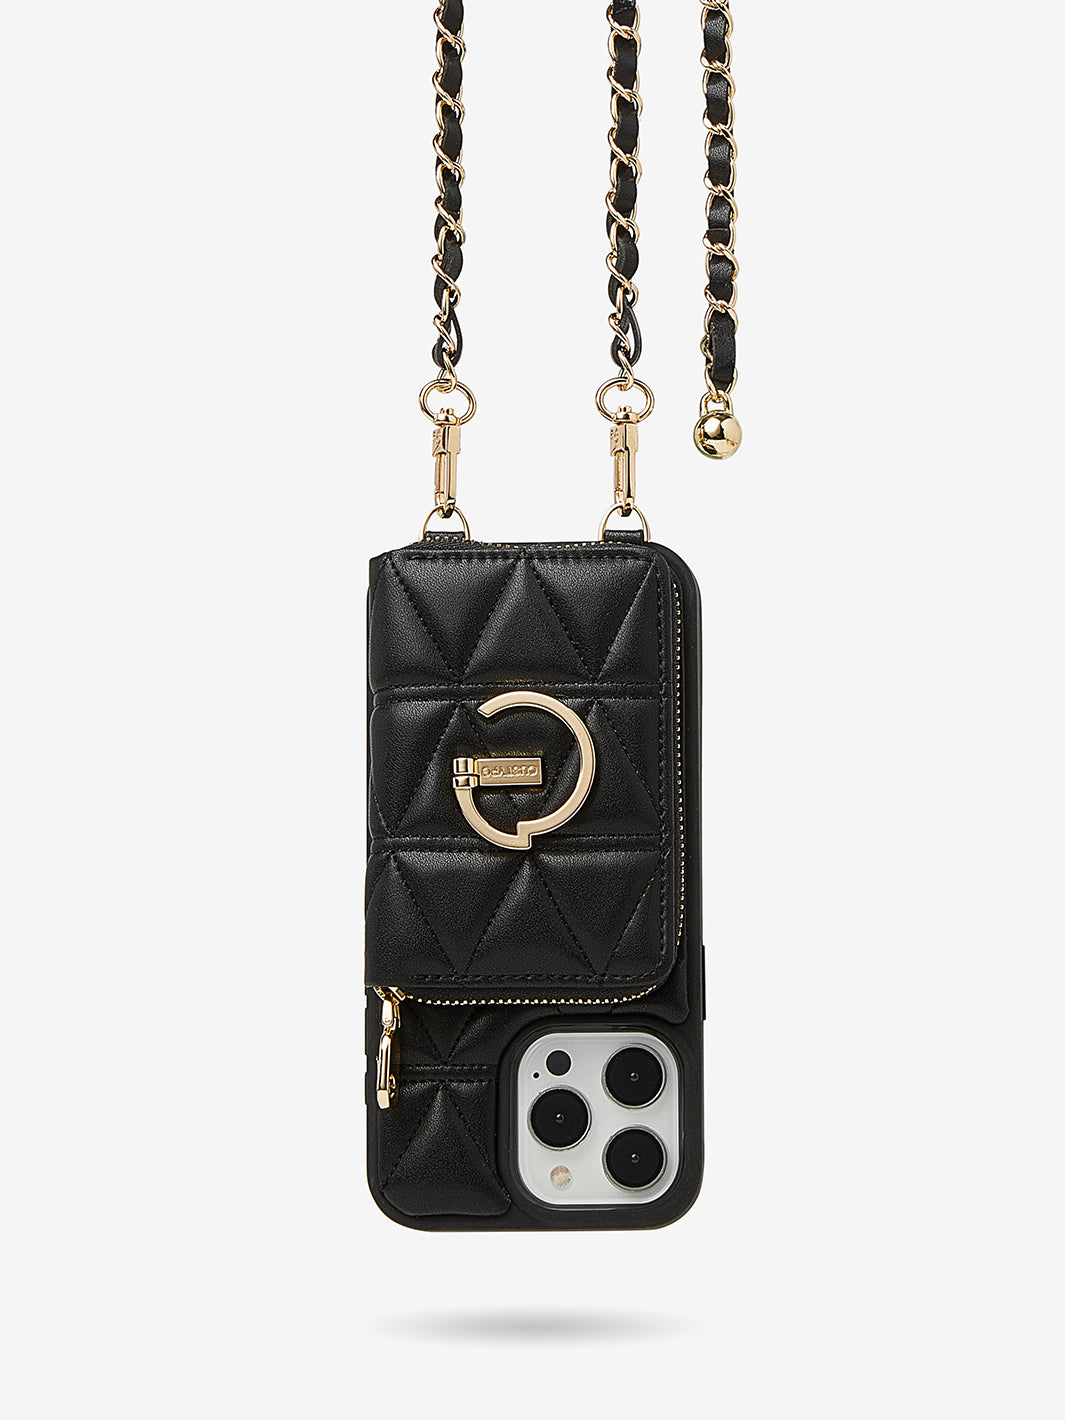 LuxeCharm- Triangle Argyle Phone Case with Chain Leather Strap Black